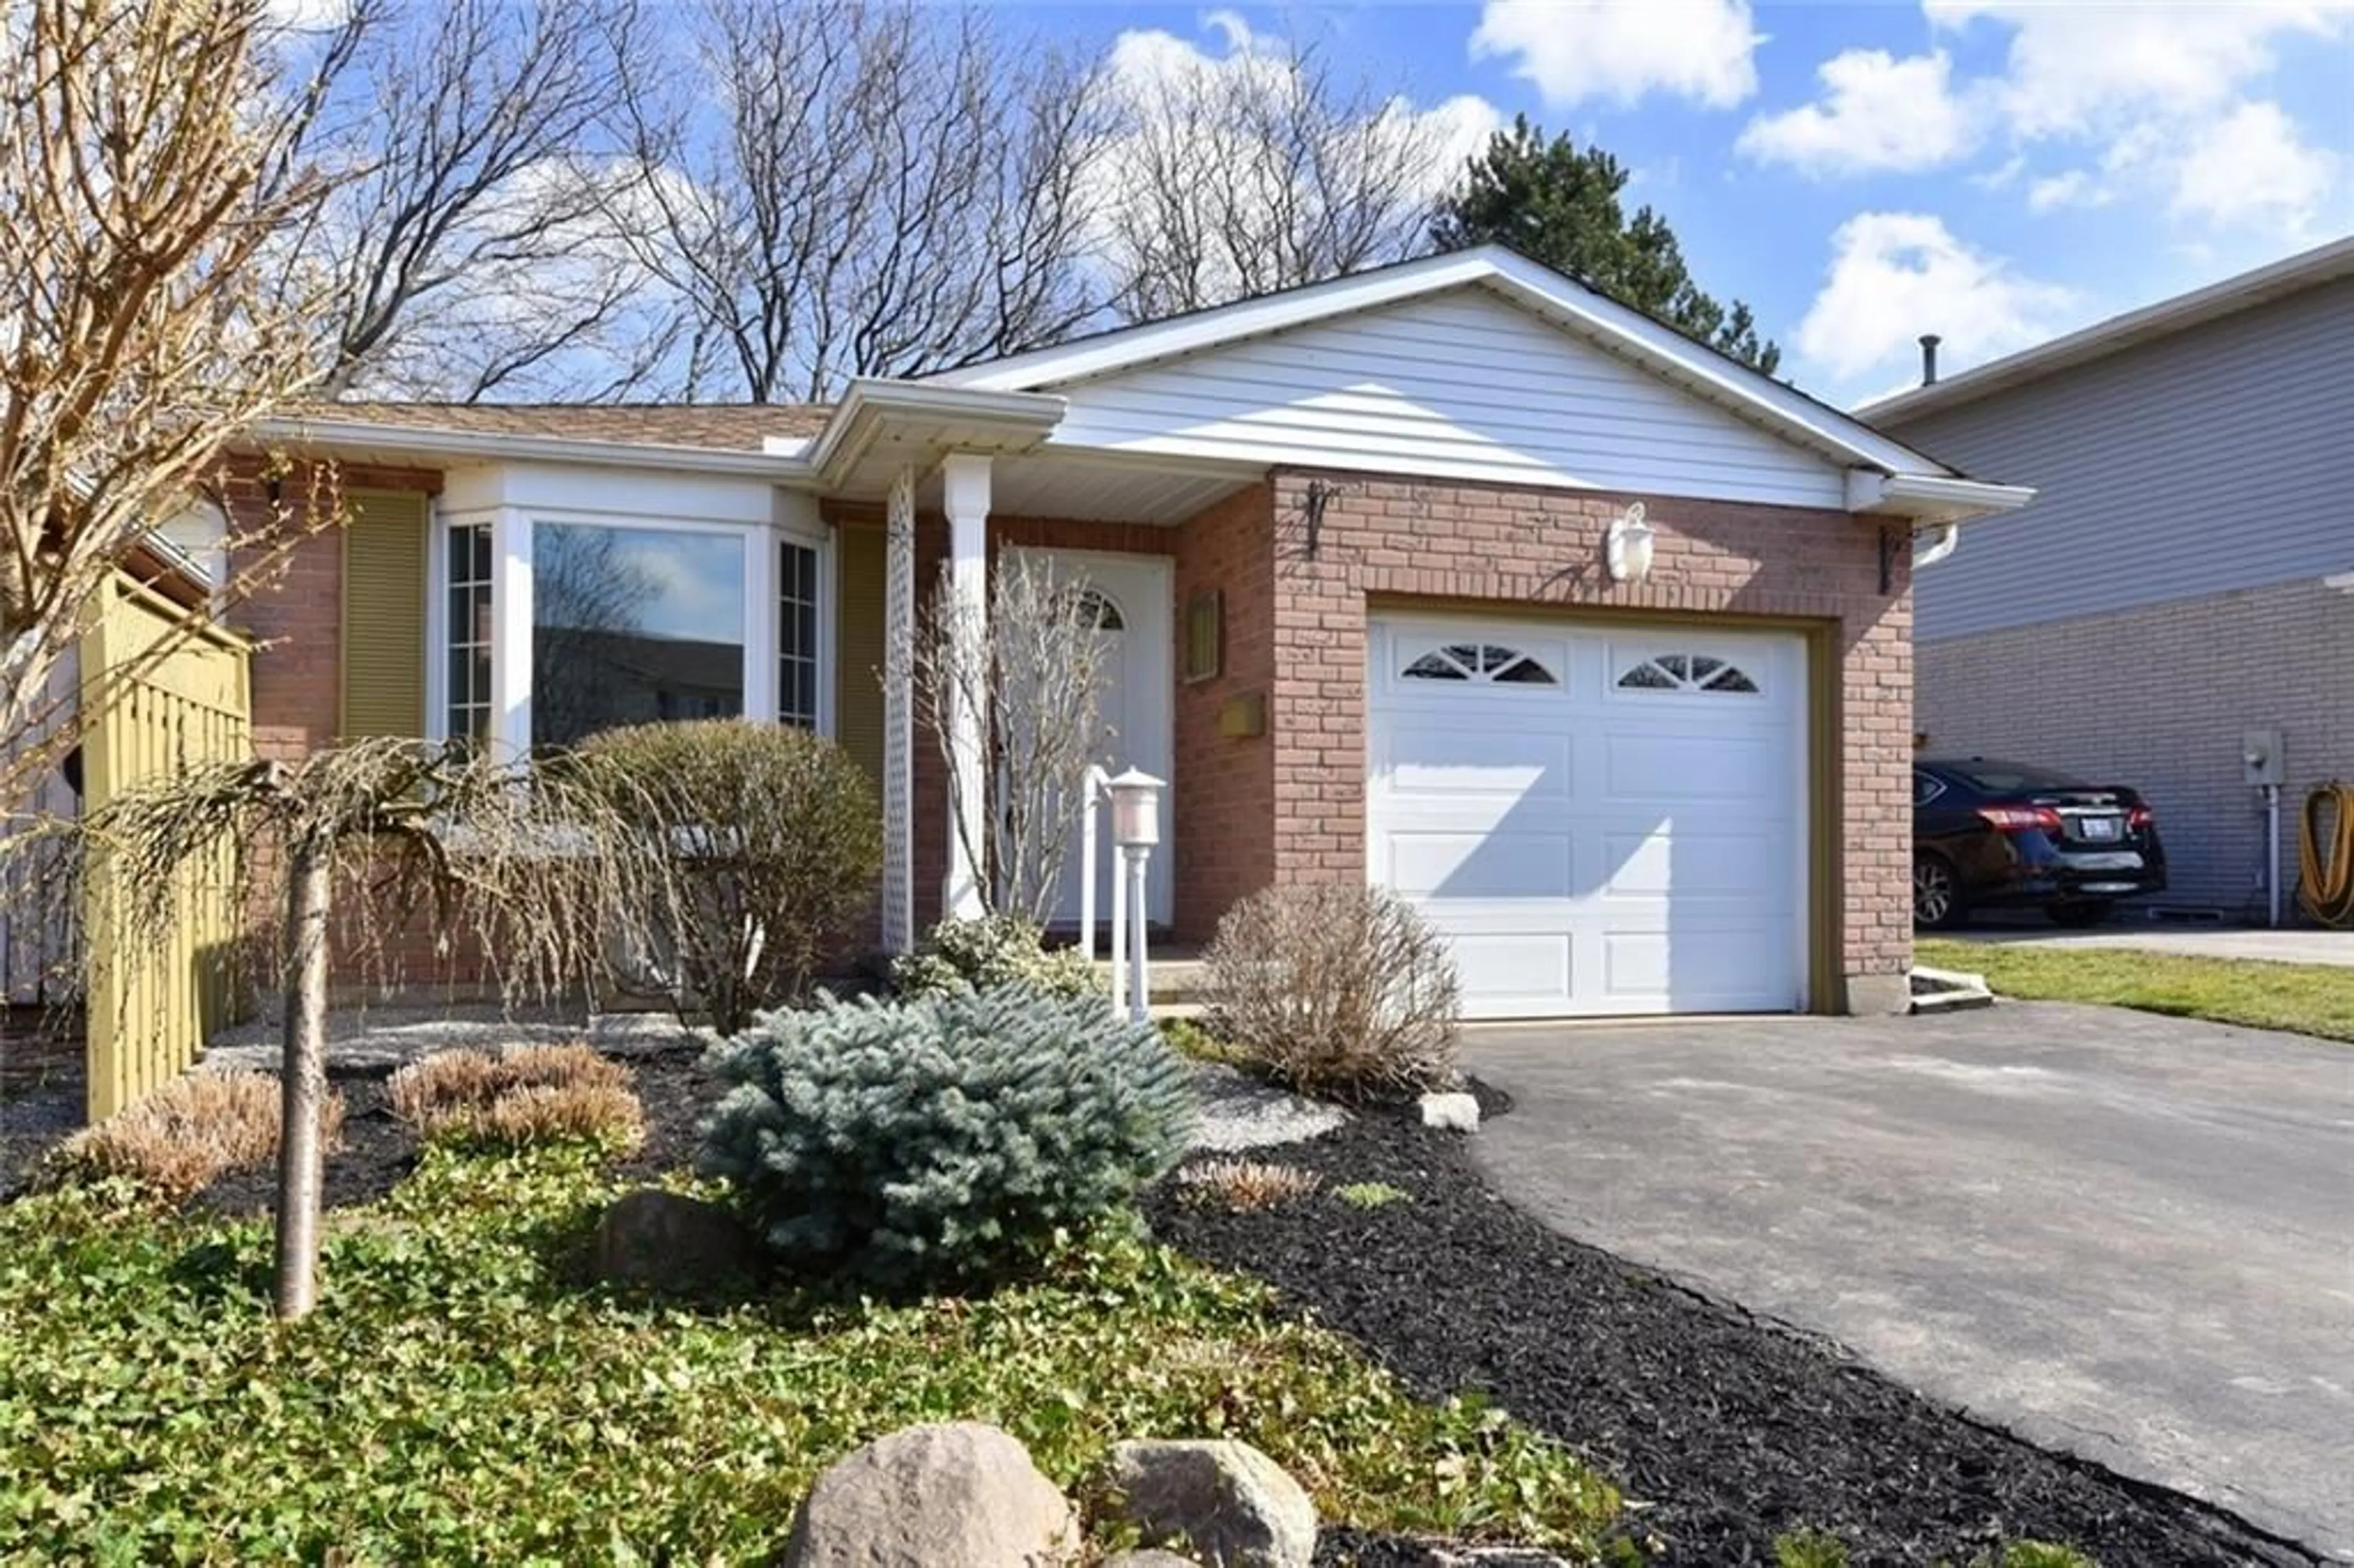 Home with brick exterior material for 10 SACKS Ave, Grimsby Ontario L3M 4Y4